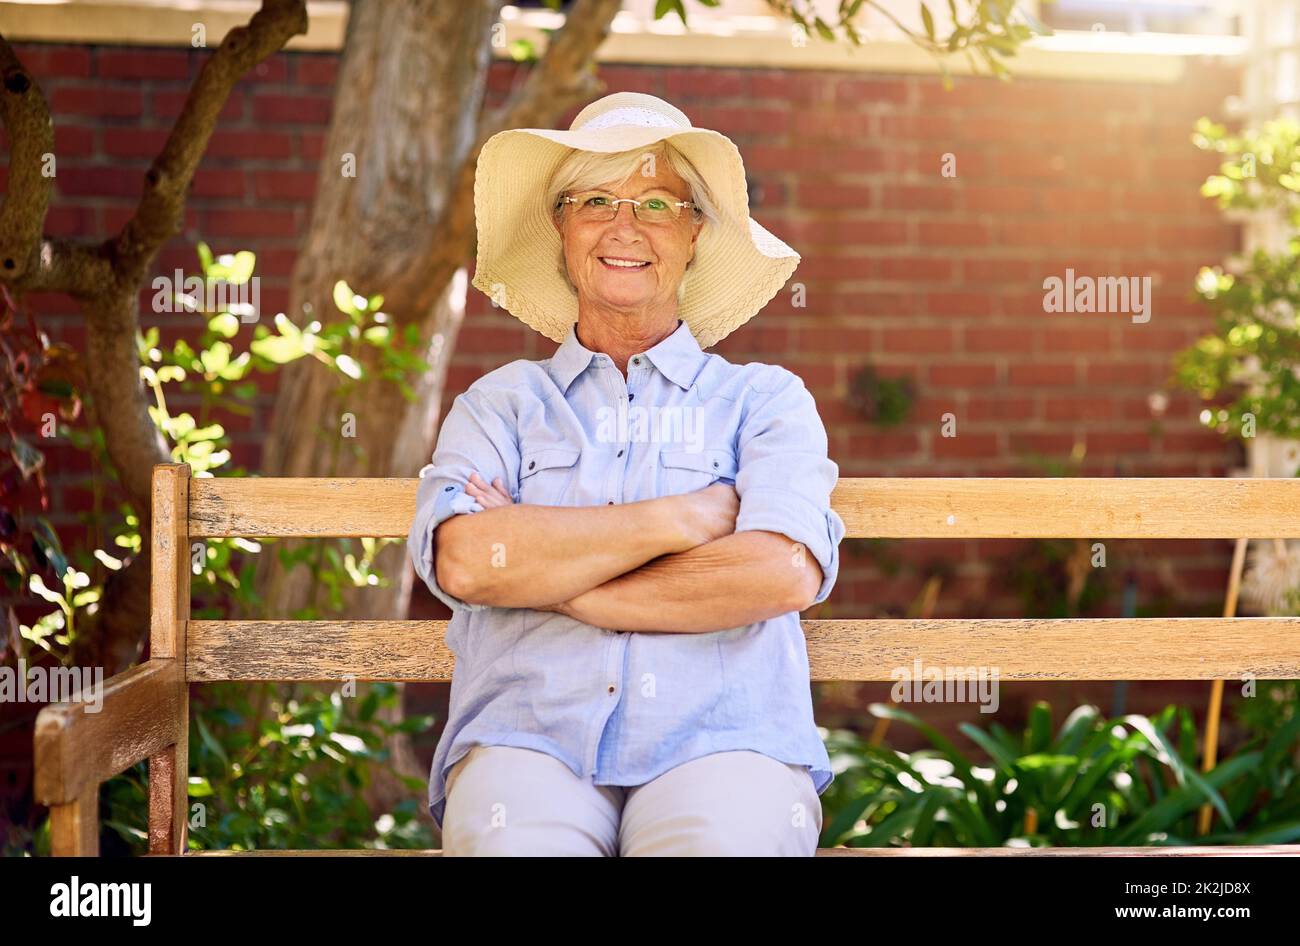 Being in the garden puts a smile on my face. Portrait of a happy senior woman relaxing on a bench in the garden. Stock Photo